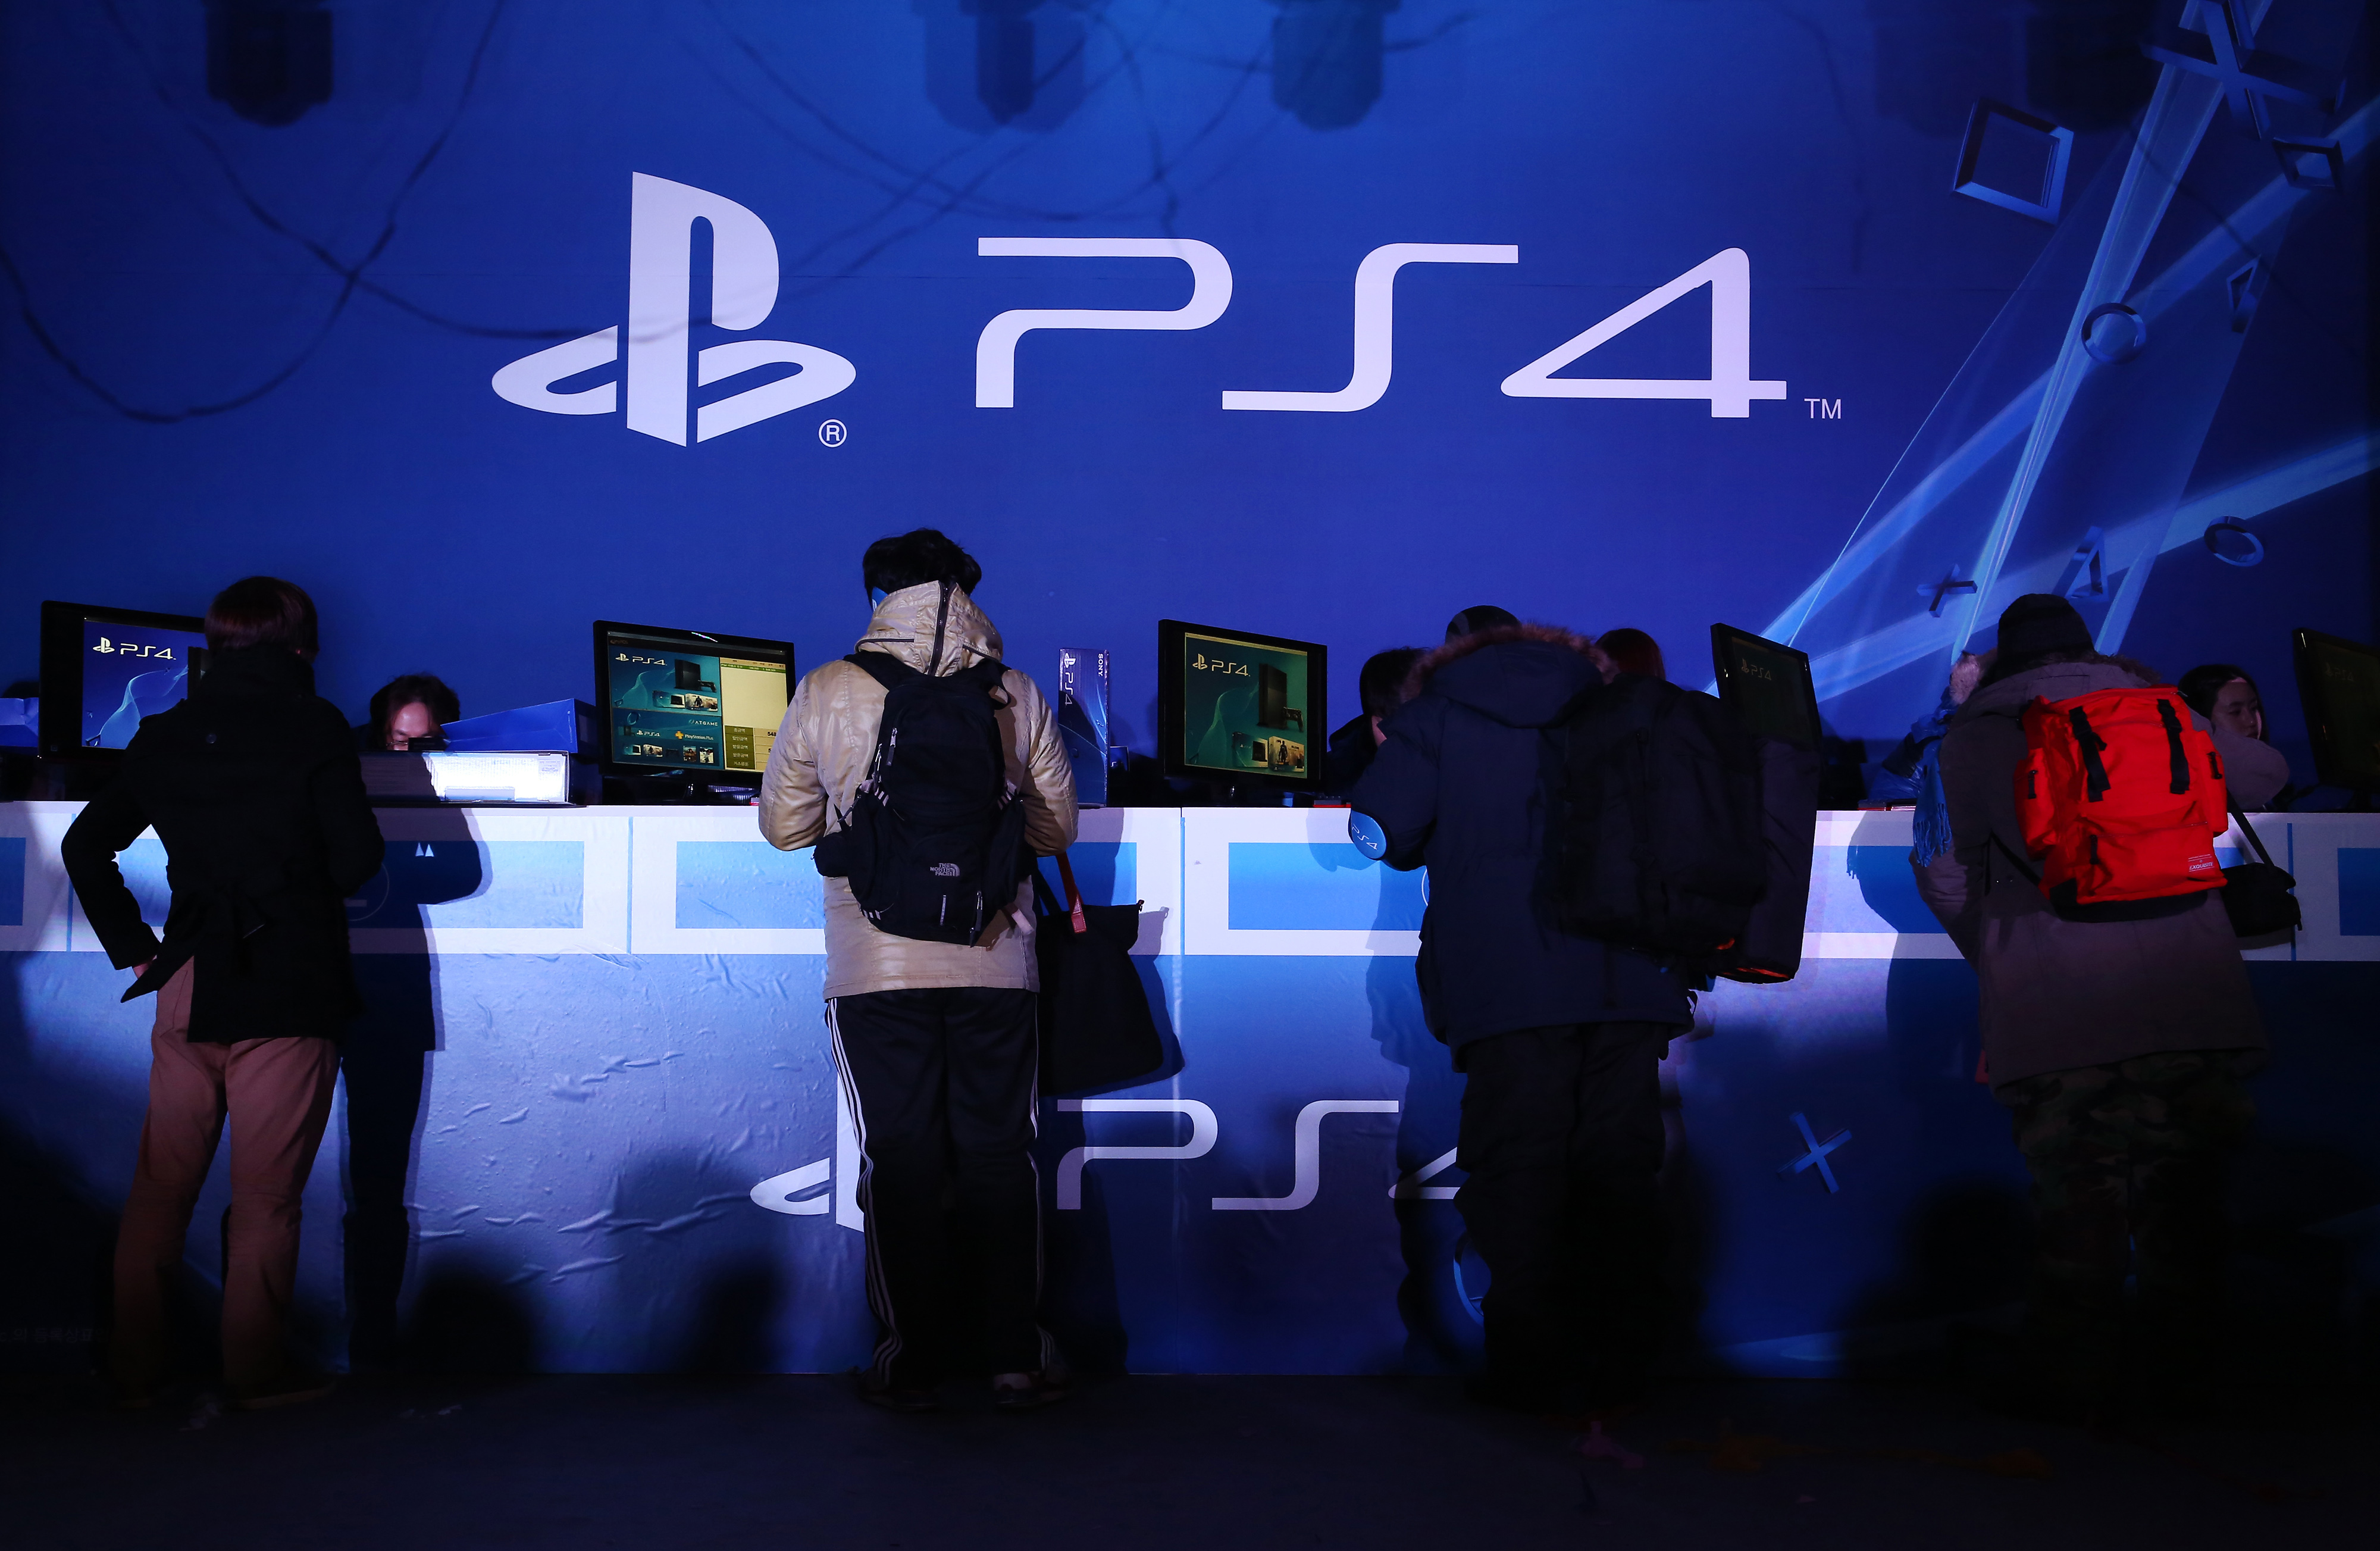 Customers buy Sony Computer Entertainment Inc.'s PlayStation 4 video game console box during the launch event in Seoul, South Korea, Dec. 17, 2013.